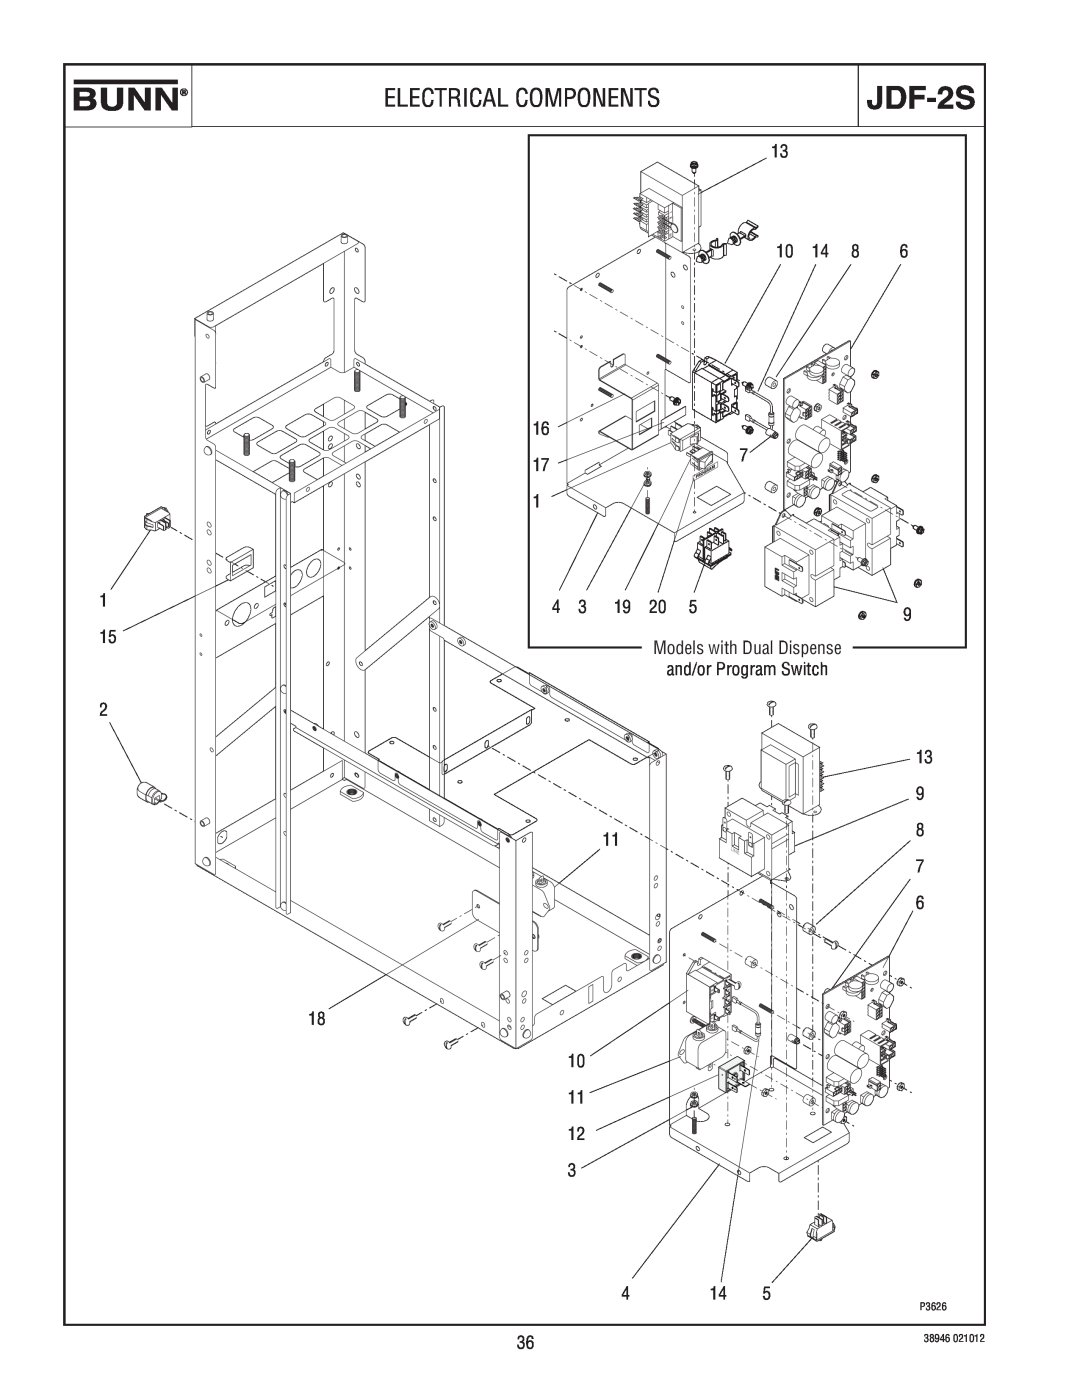 Bunn JDF-2S manual Electrical Components 